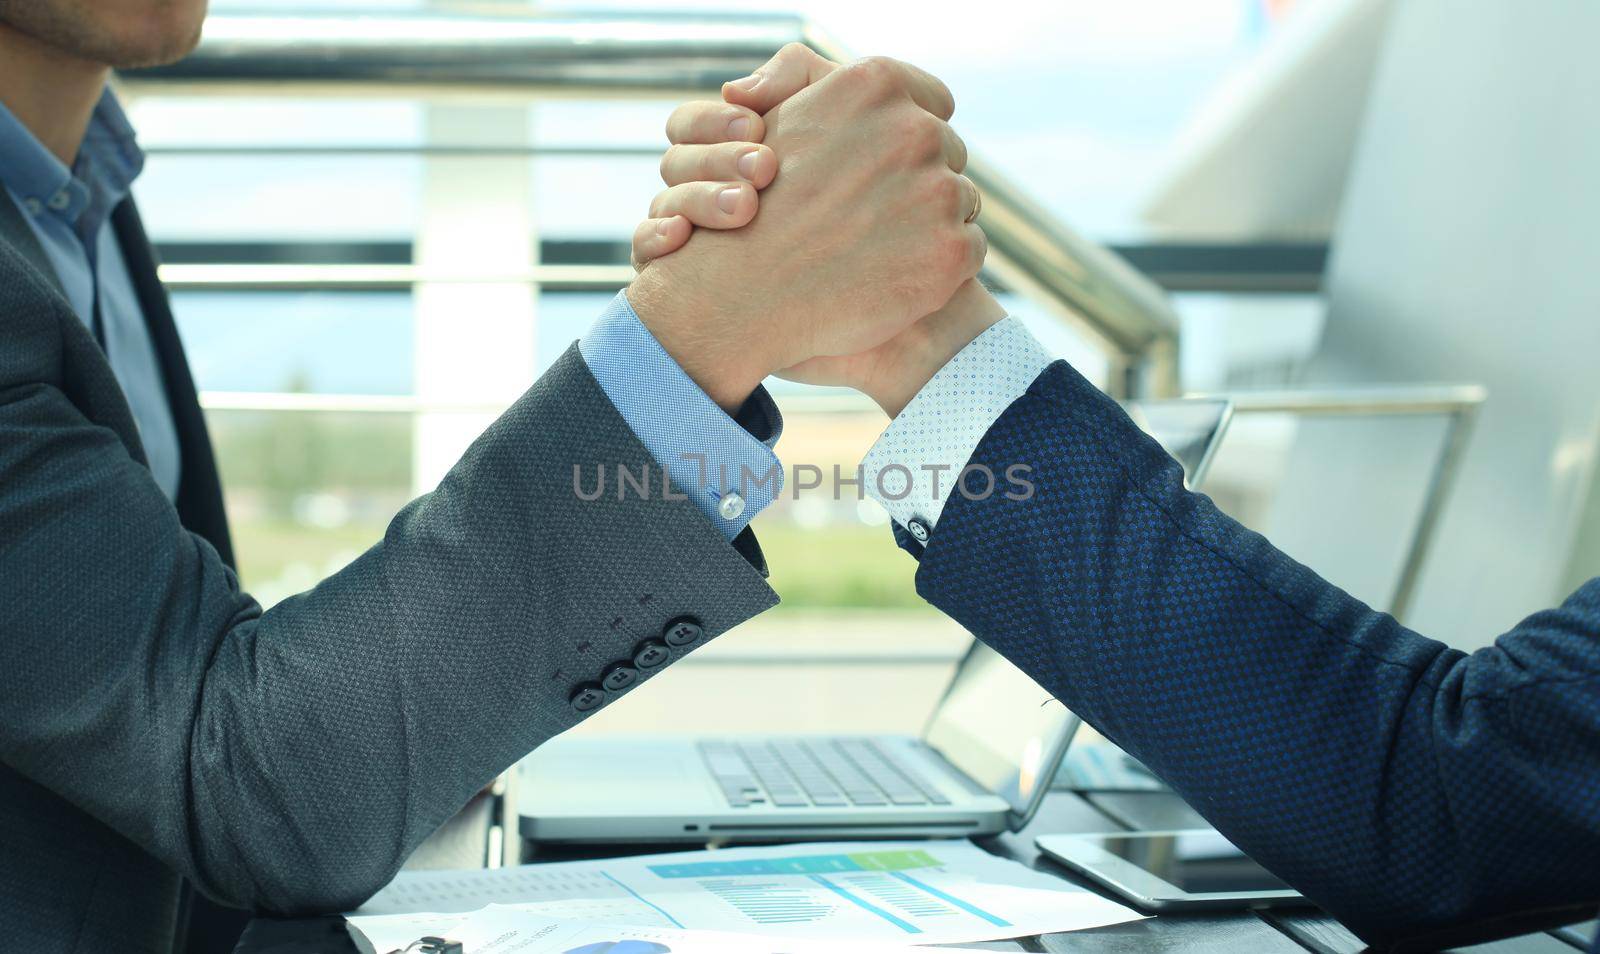 Two businessmen press hands each other on a forward background.